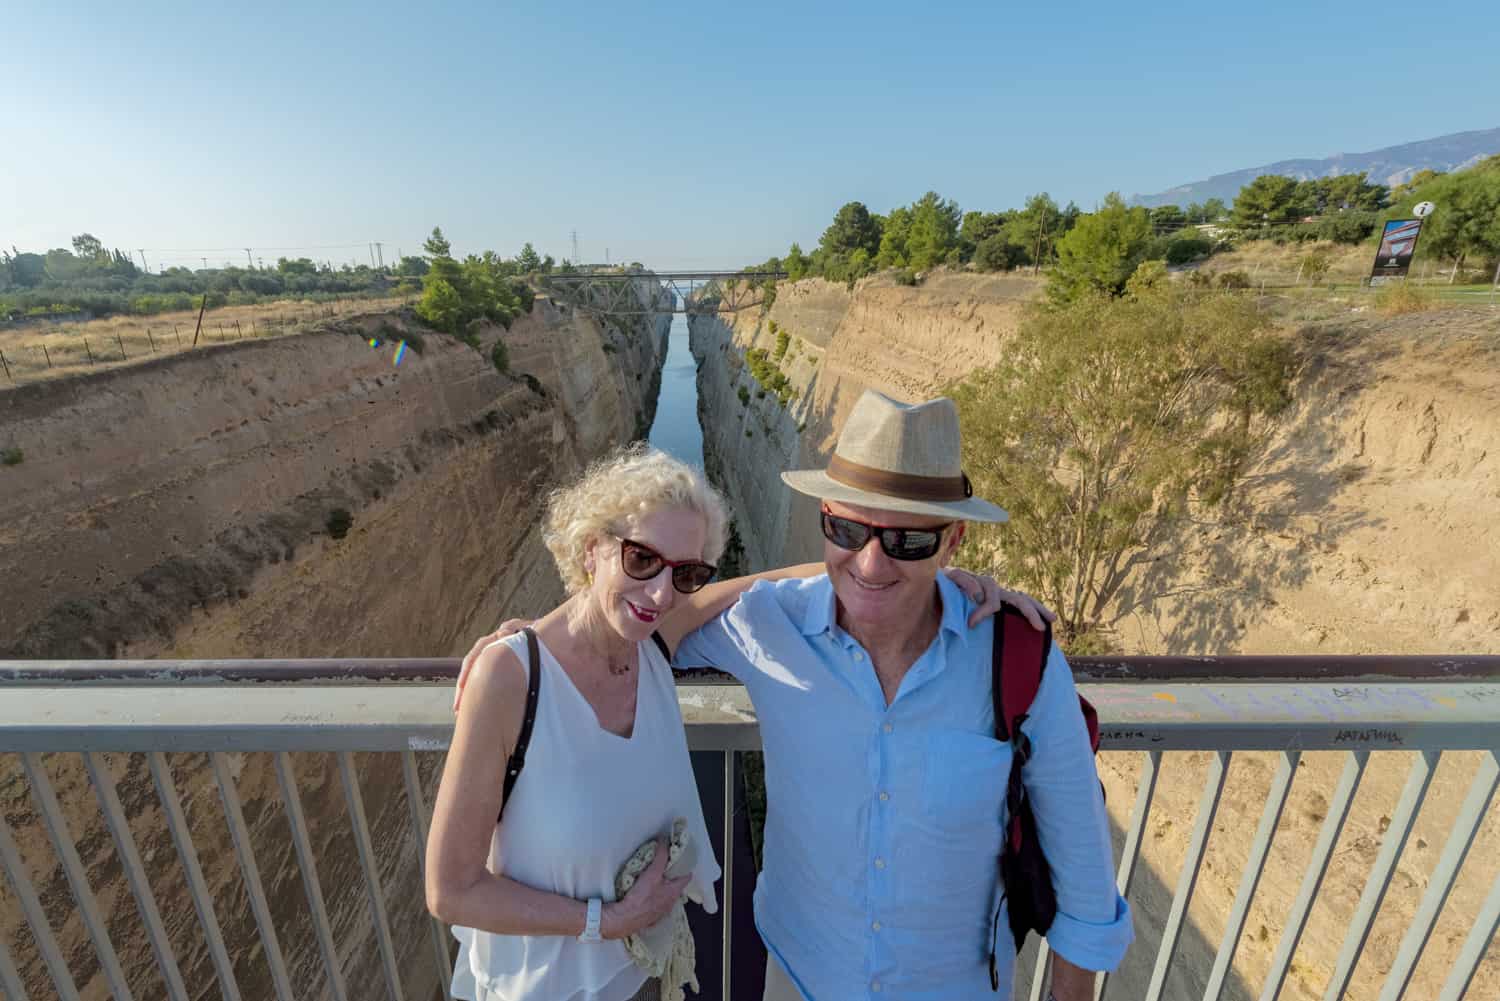 The Corinth canal connects the Ionian sea with the gulf of Corinth and is an impressive historical piece of engineering